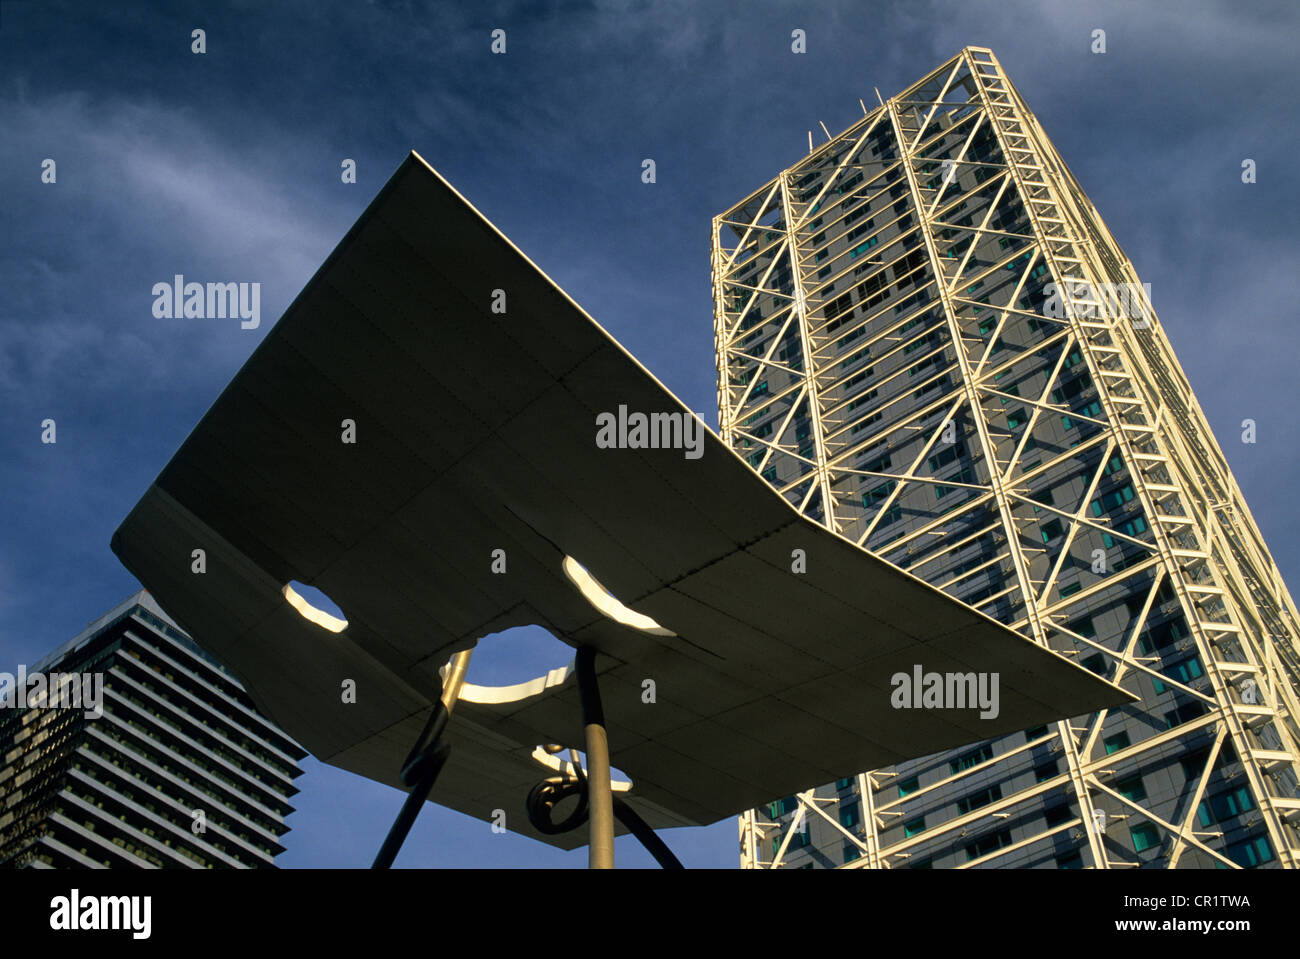 Spain, Catalonia, Barcelona, sculpture of David and Goliath near the Torre de Artes (Arts Tower), Olympic village District Stock Photo